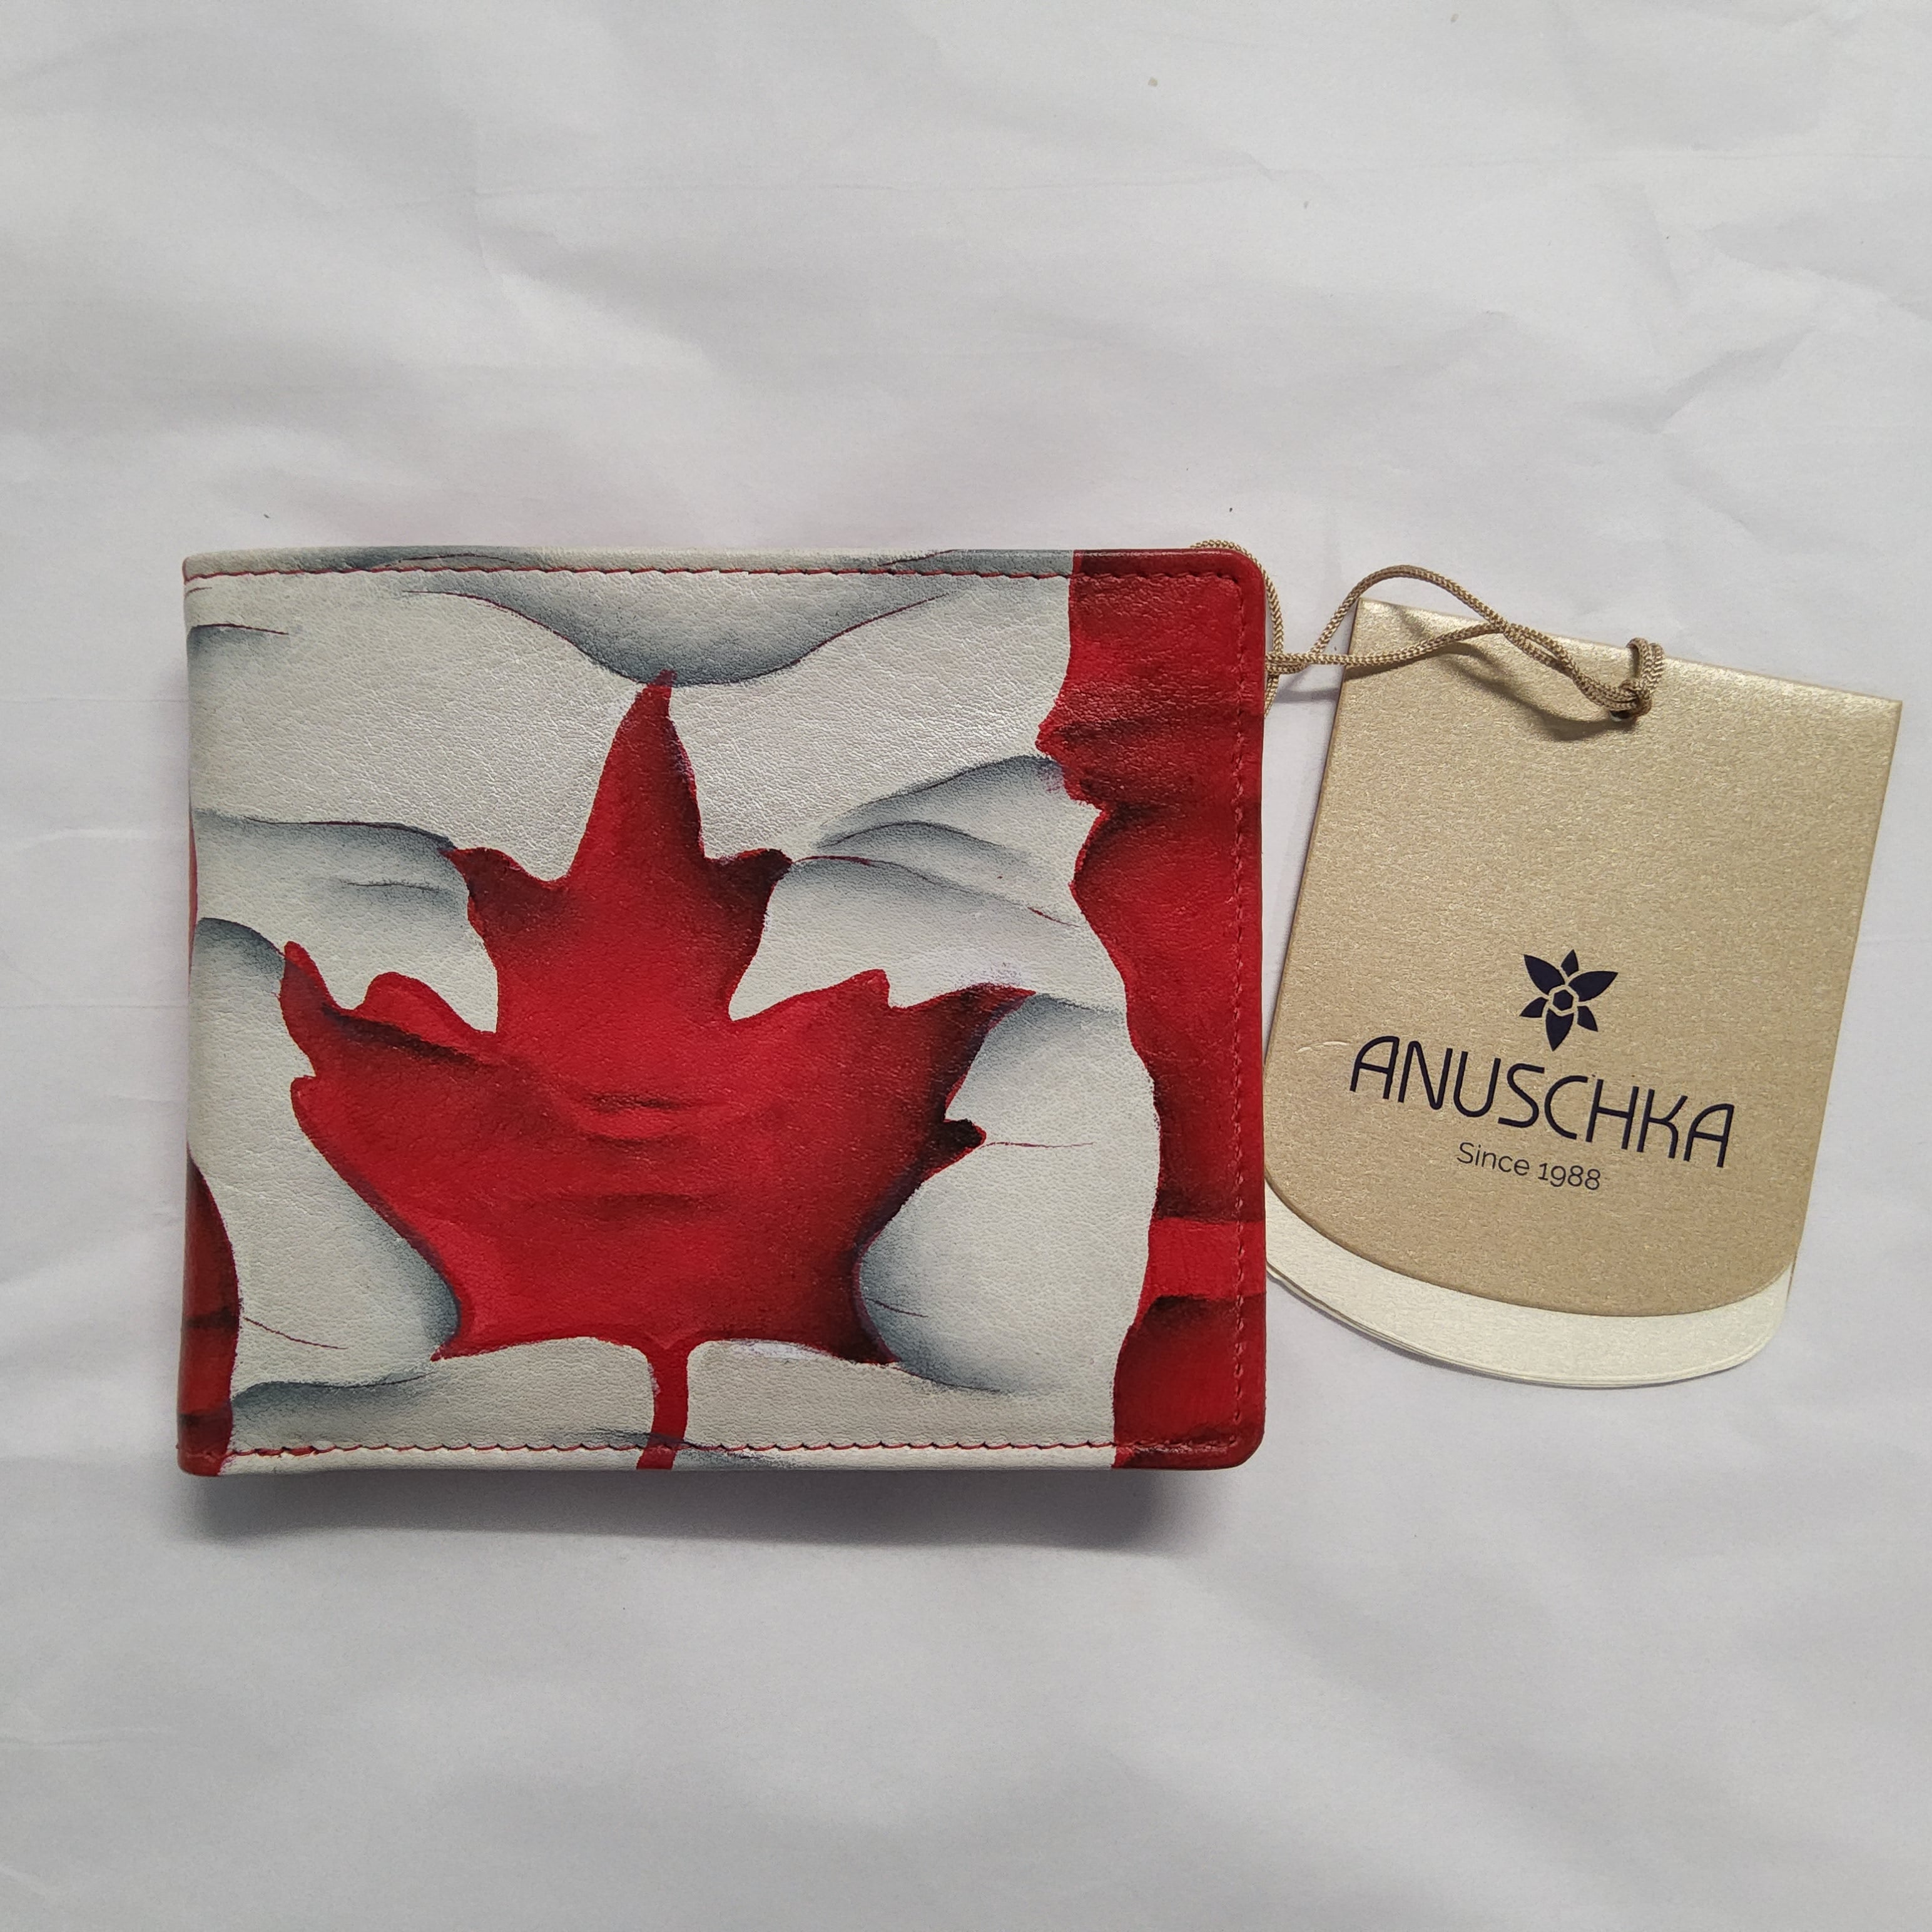 Anuschka Leather Wallet - "Maple Leaf" Hand painted - RFID Protection - 3001-MPL